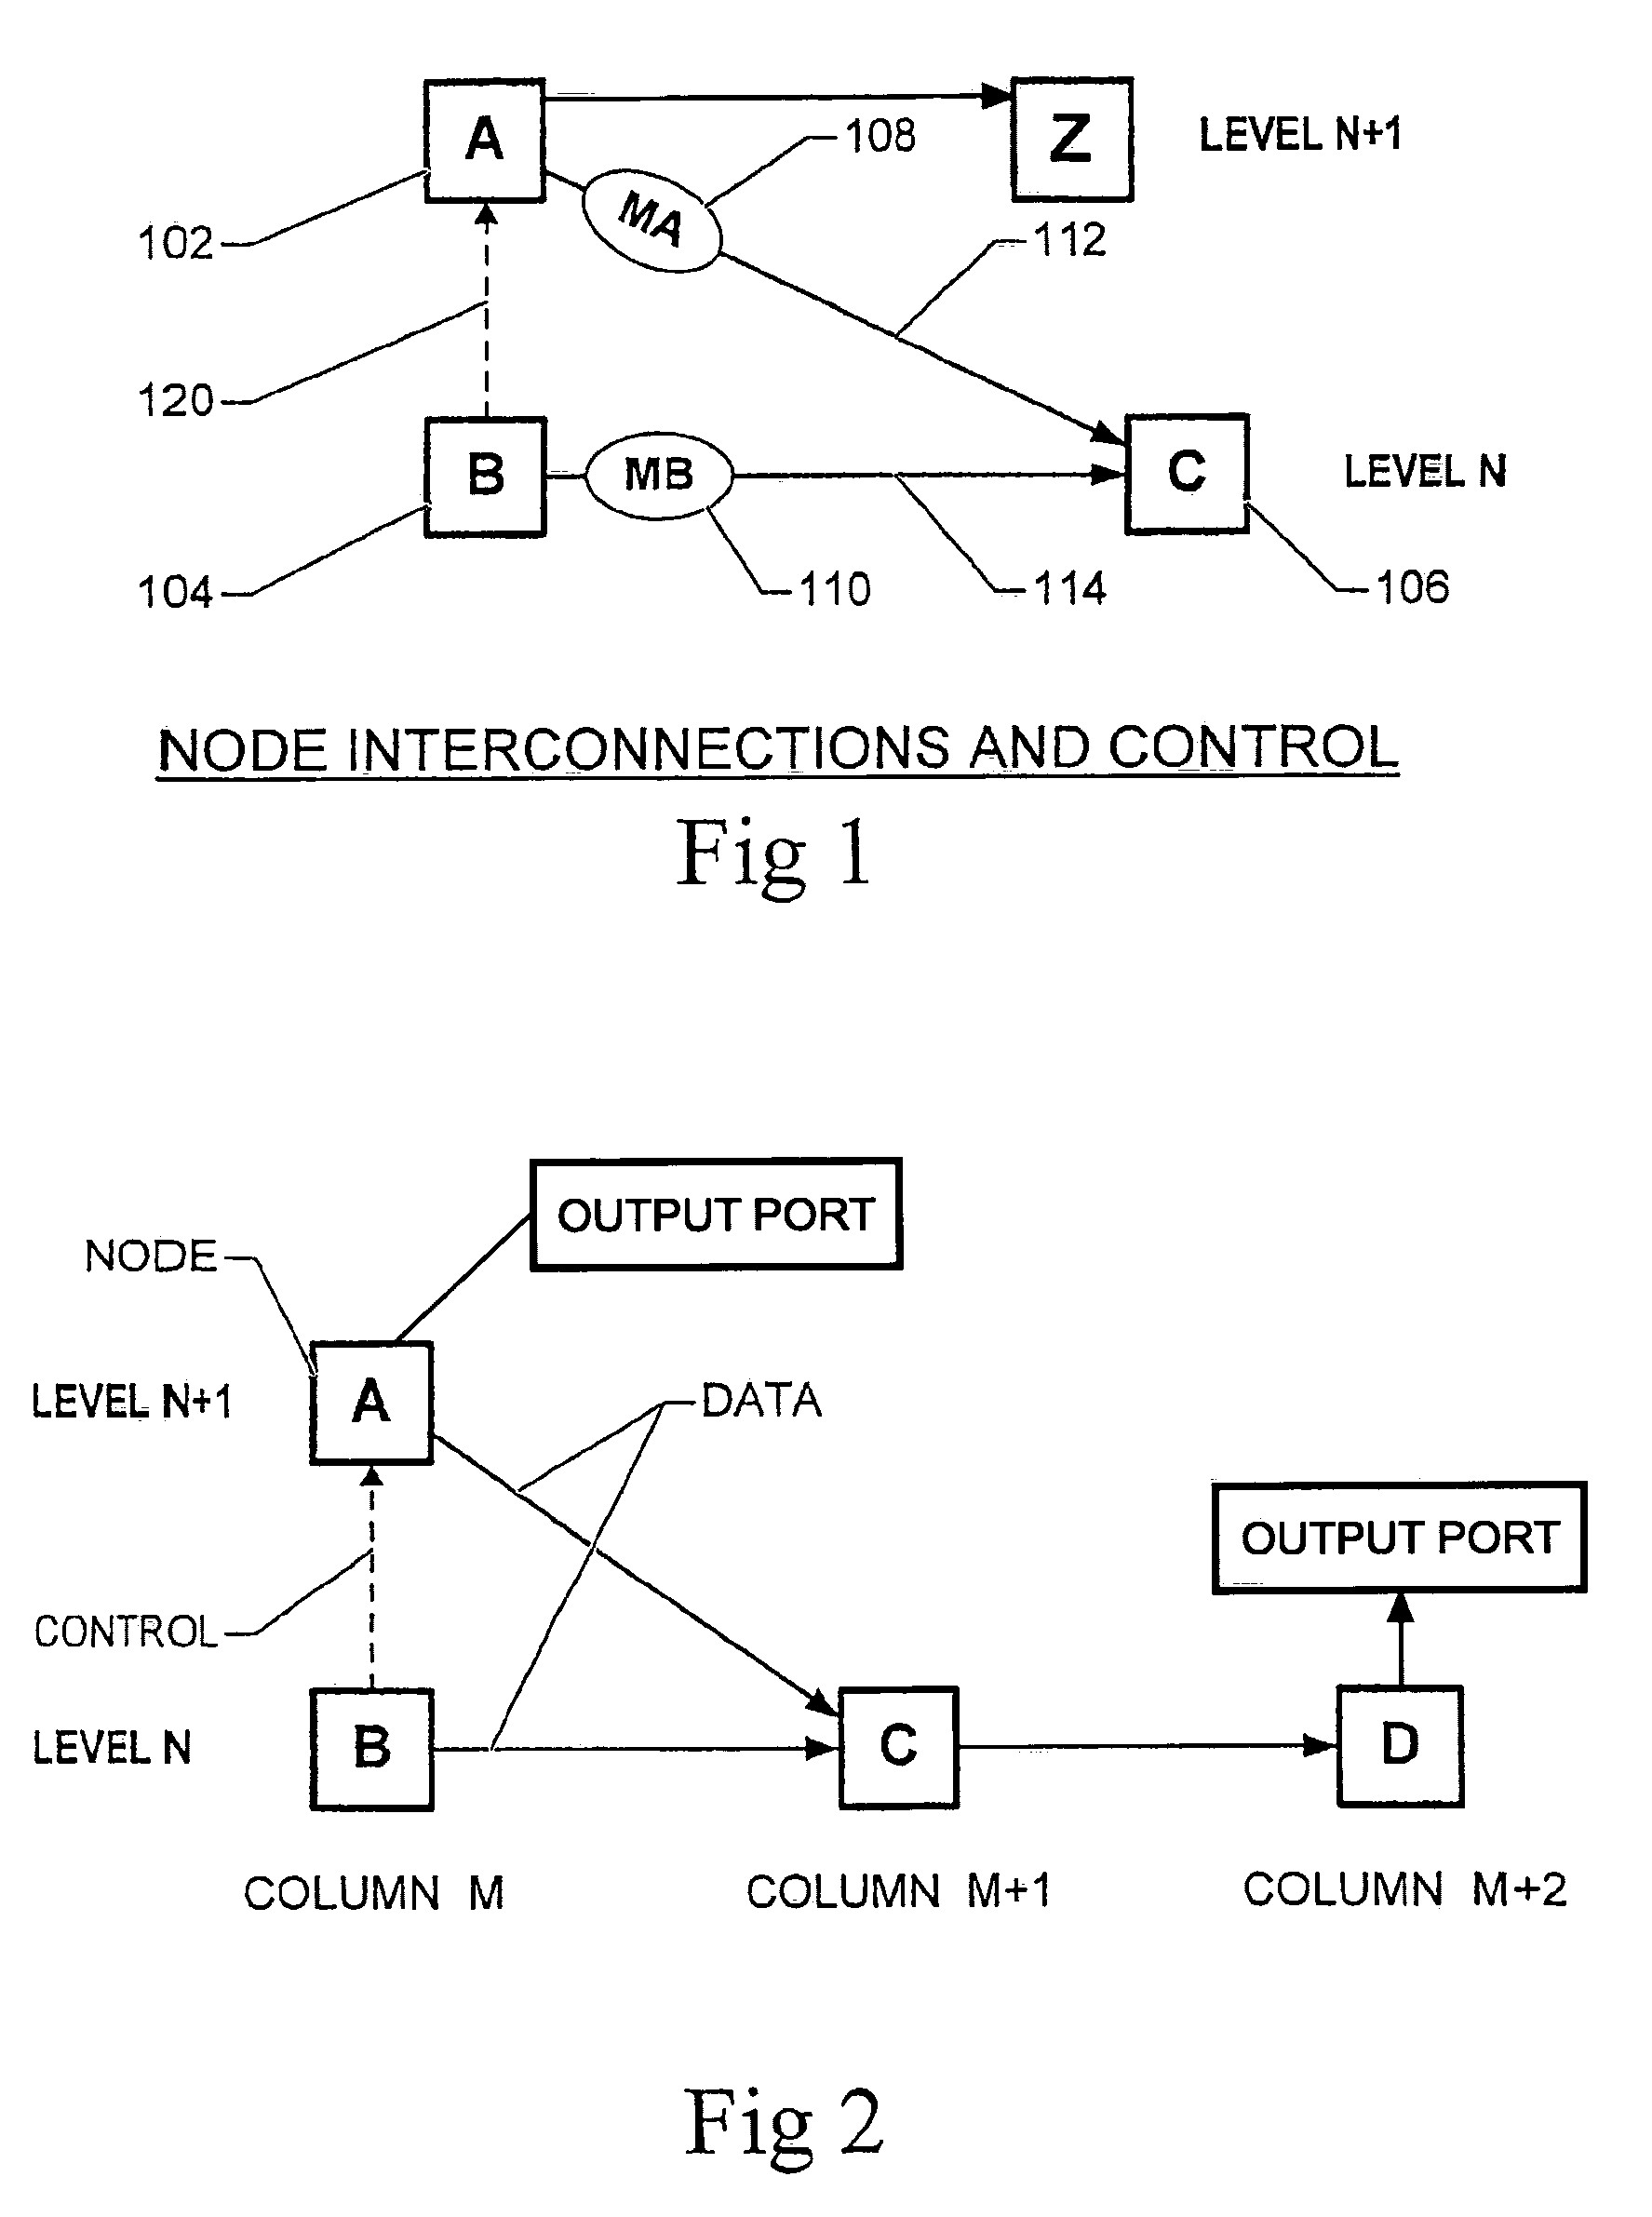 Scalable apparatus and method for increasing throughput in multiple level minimum logic networks using a plurality of control lines